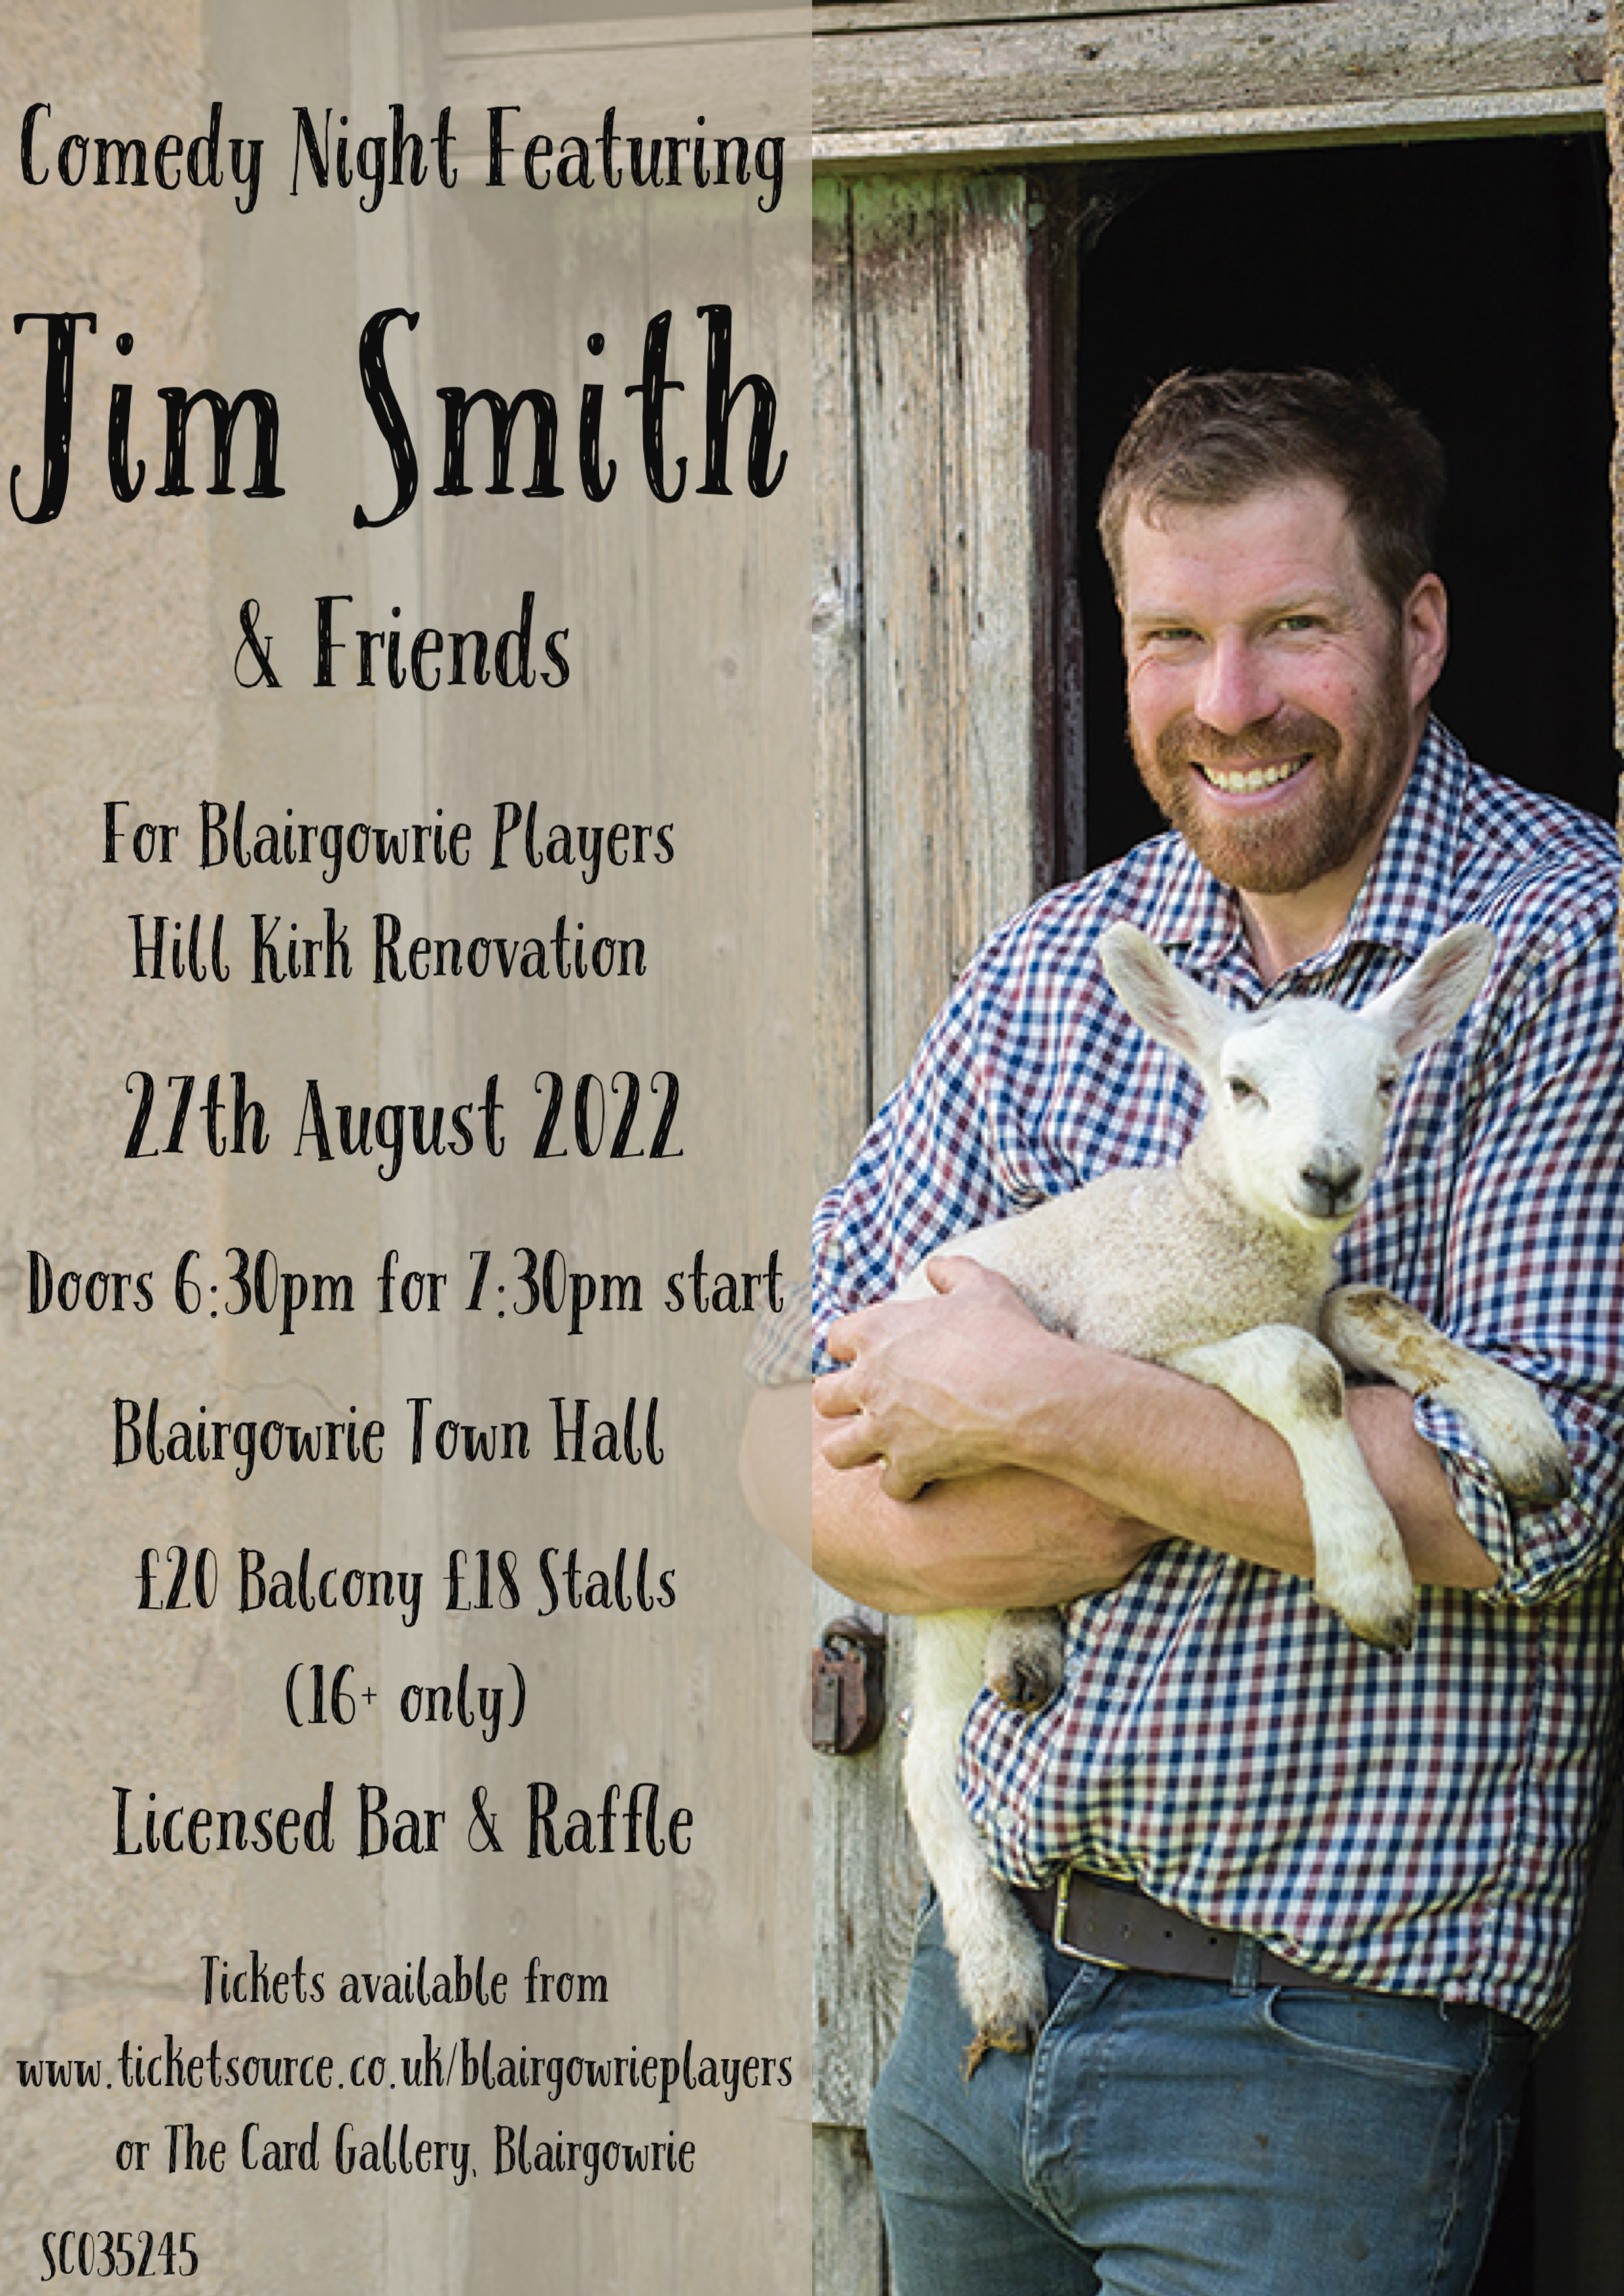 An Evening With Jim Smith & Friends